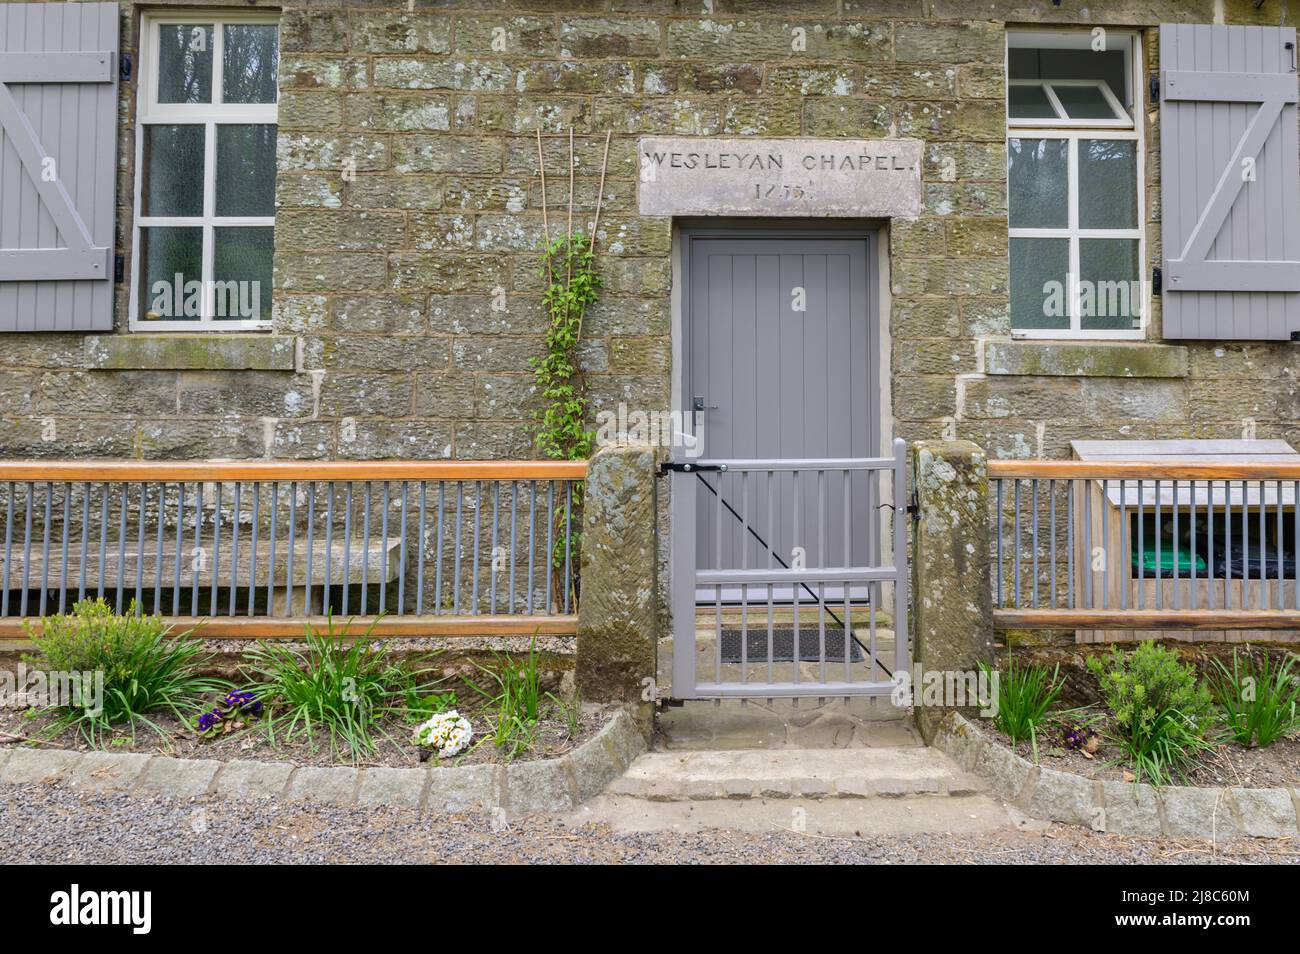 Renovated Wesleyan Chapel at Botton in Danby Dale, North Yorkshire Stock Photo